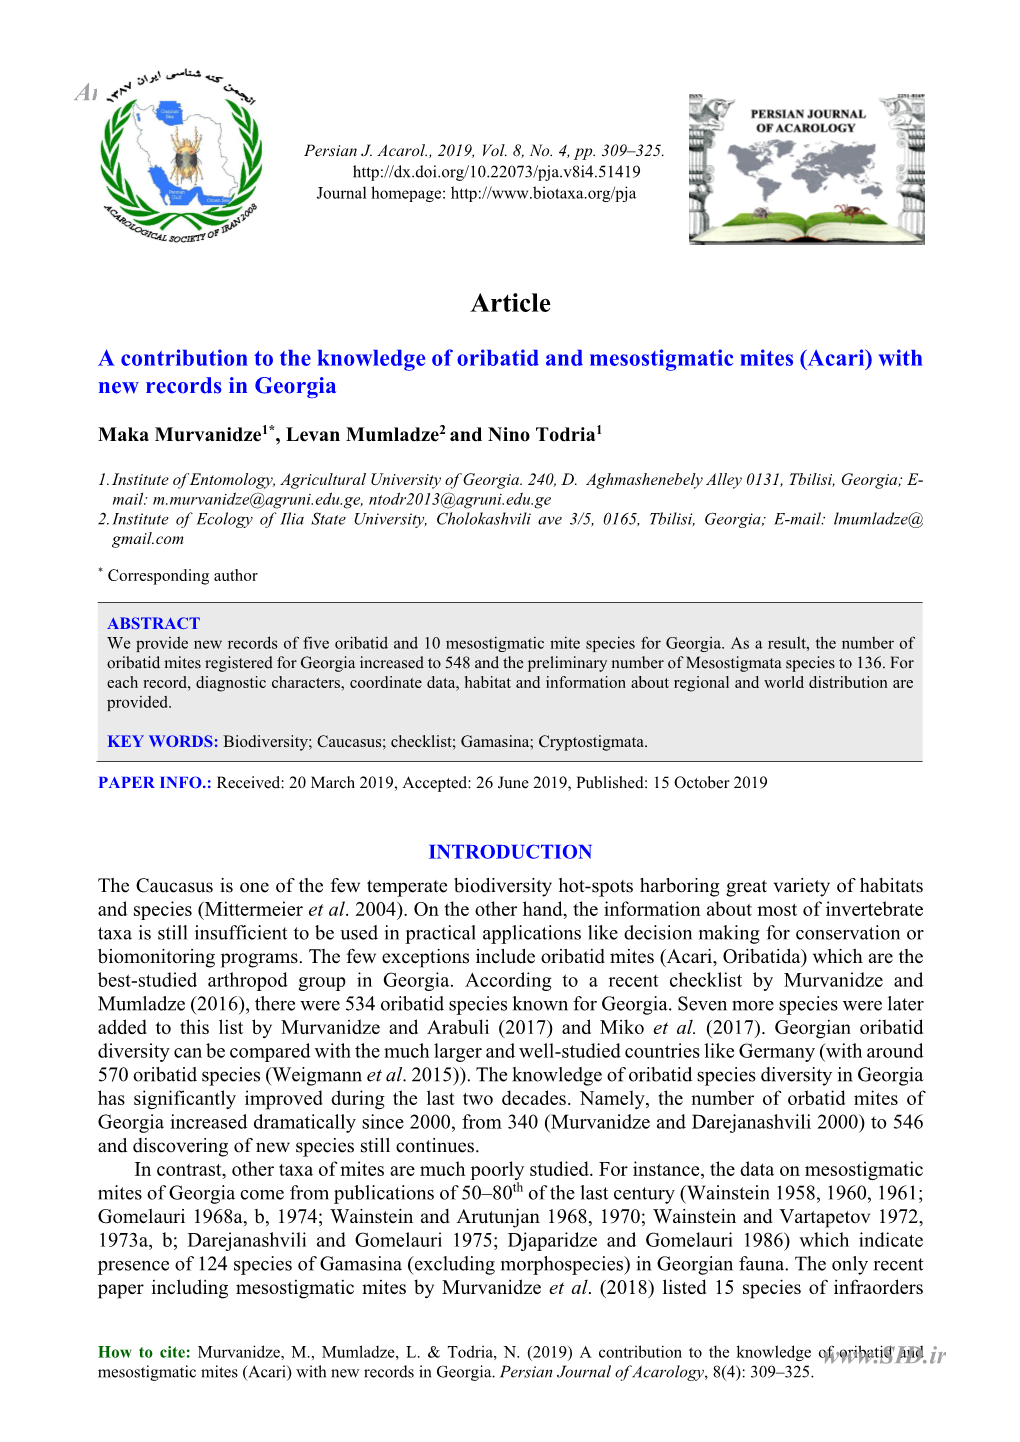 A Contribution to the Knowledge of Oribatid and Mesostigmatic Mites (Acari) with New Records in Georgia